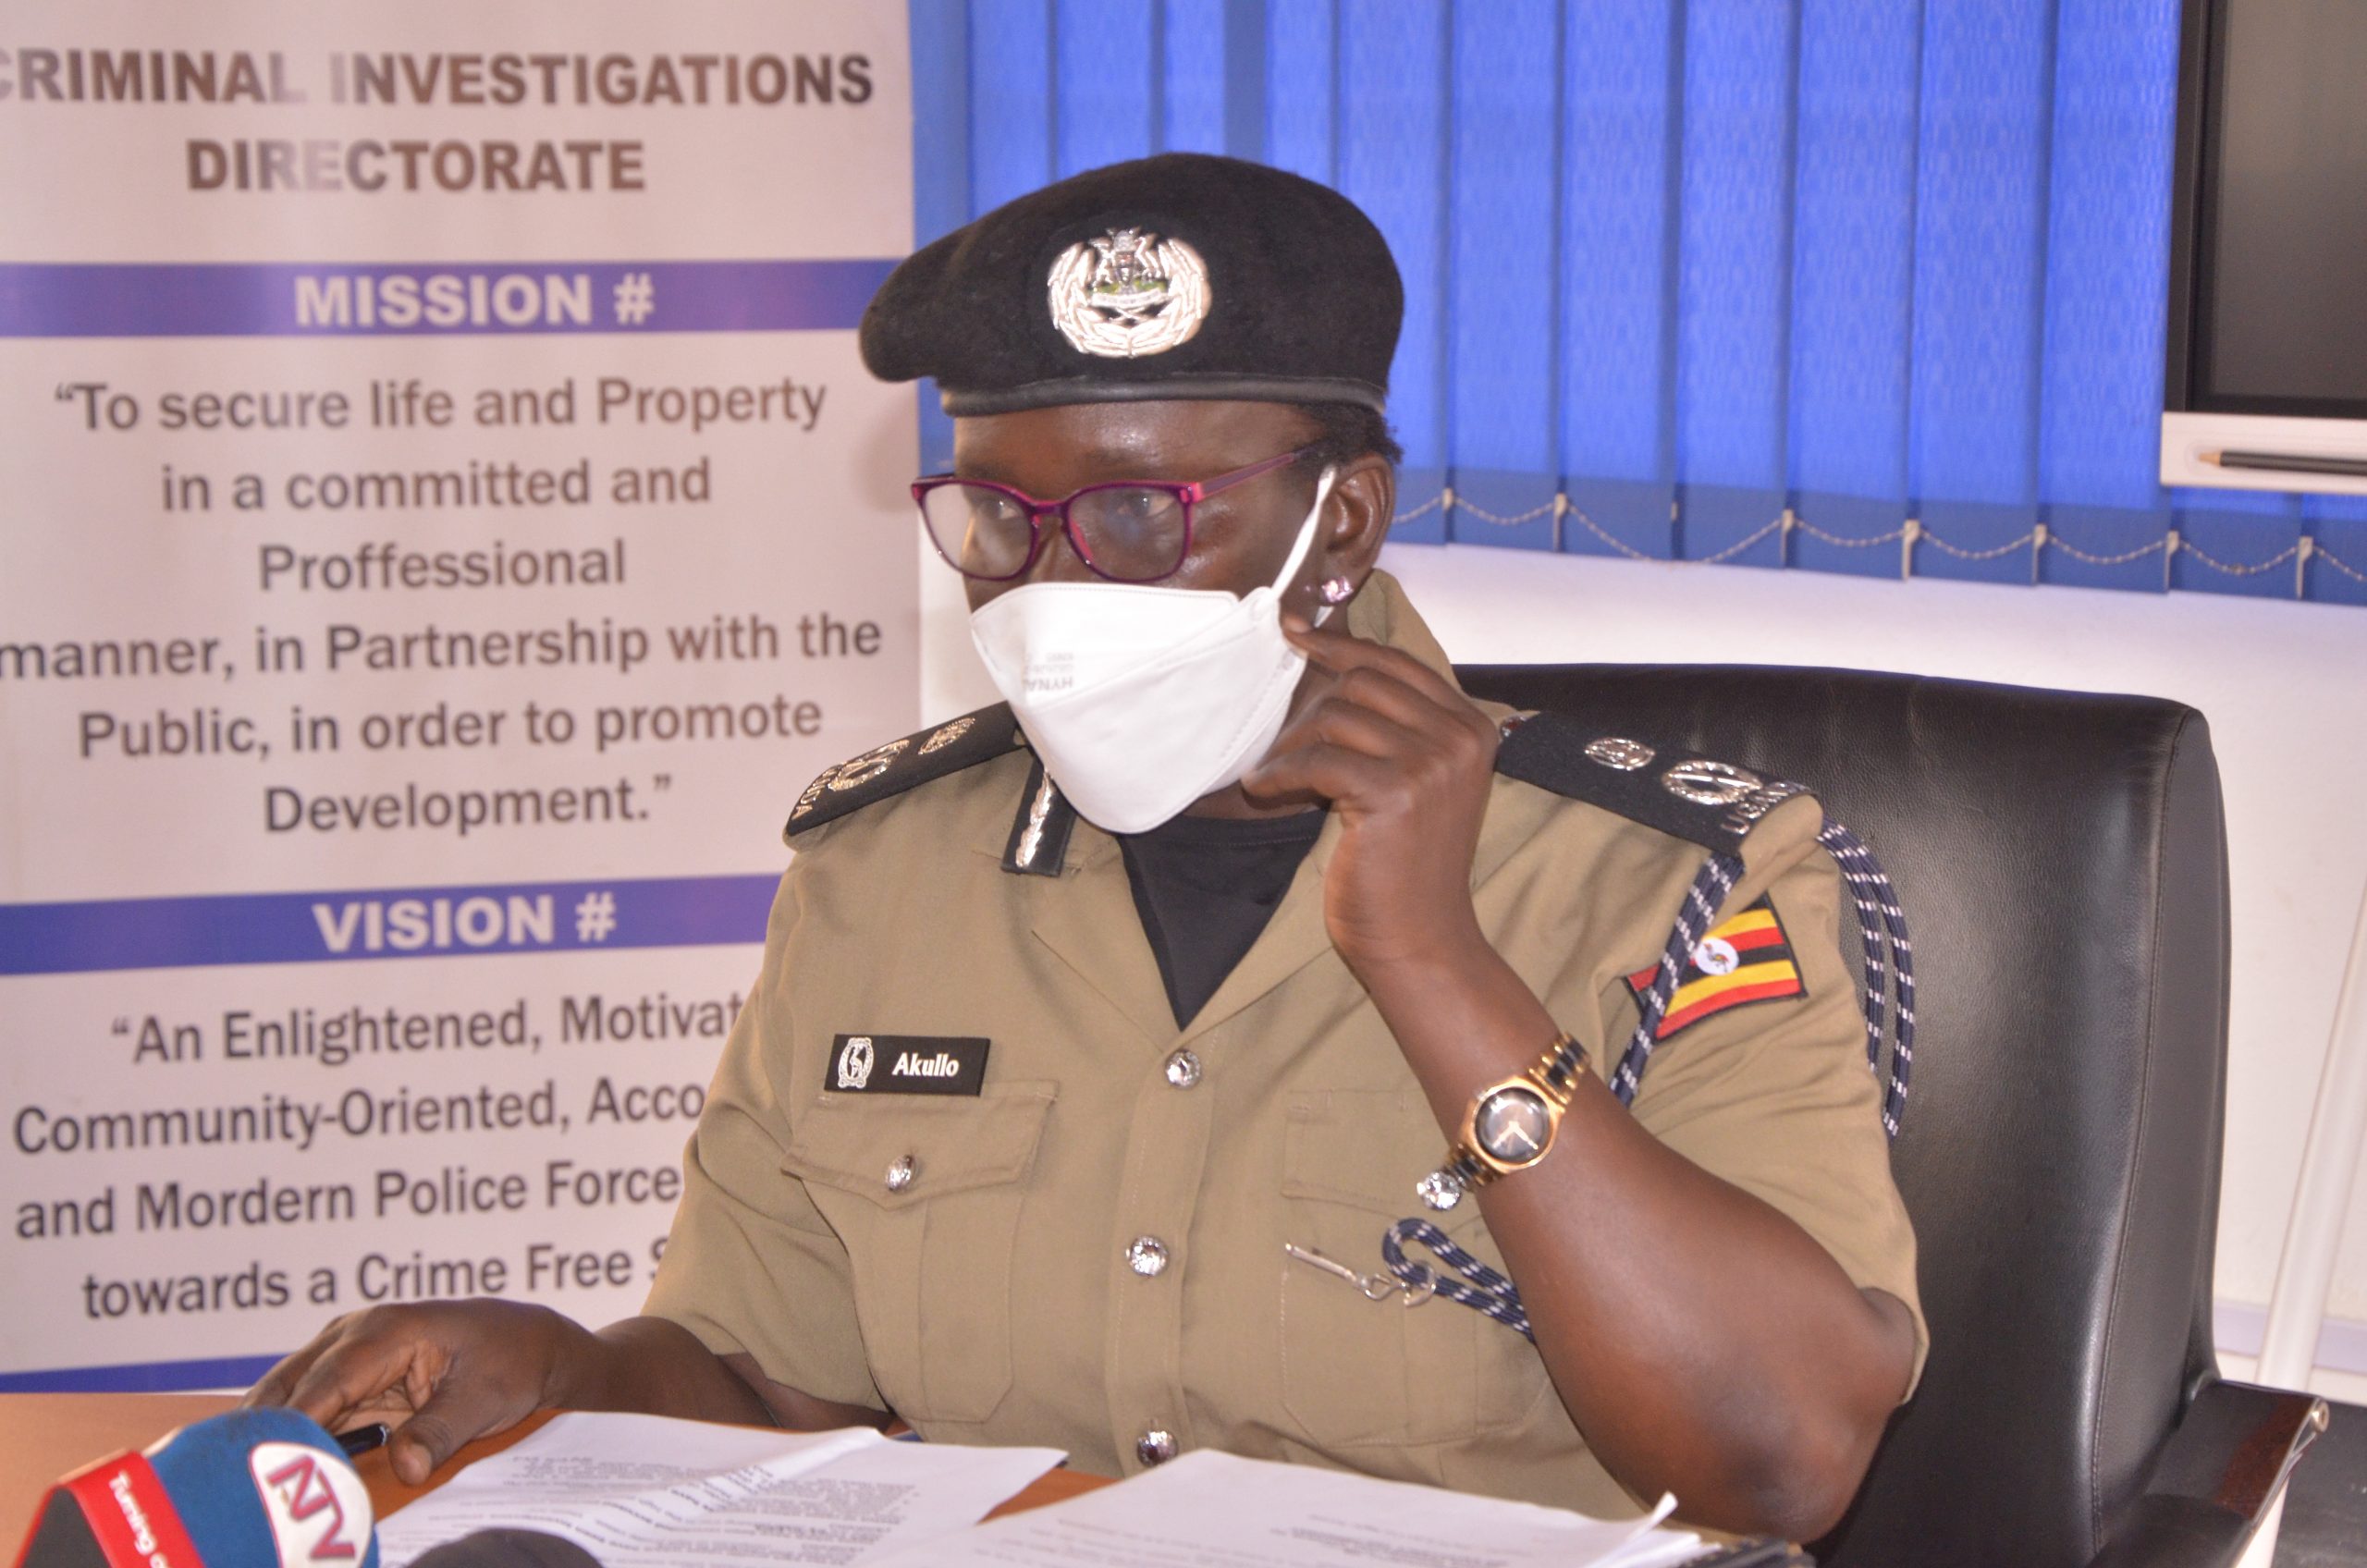 REPORT ON MAJOR CASES HANDLED, DEFILEMENT IN SCHOOLS, CRIMINAL SYNDICATES  BUSTED, SUCCESS STORIES OF ANTI CRIME INFRASTRUCTURE, SOME KEY CONVICTIONS  AND TOKORA OPERATIONS - Uganda Police Force